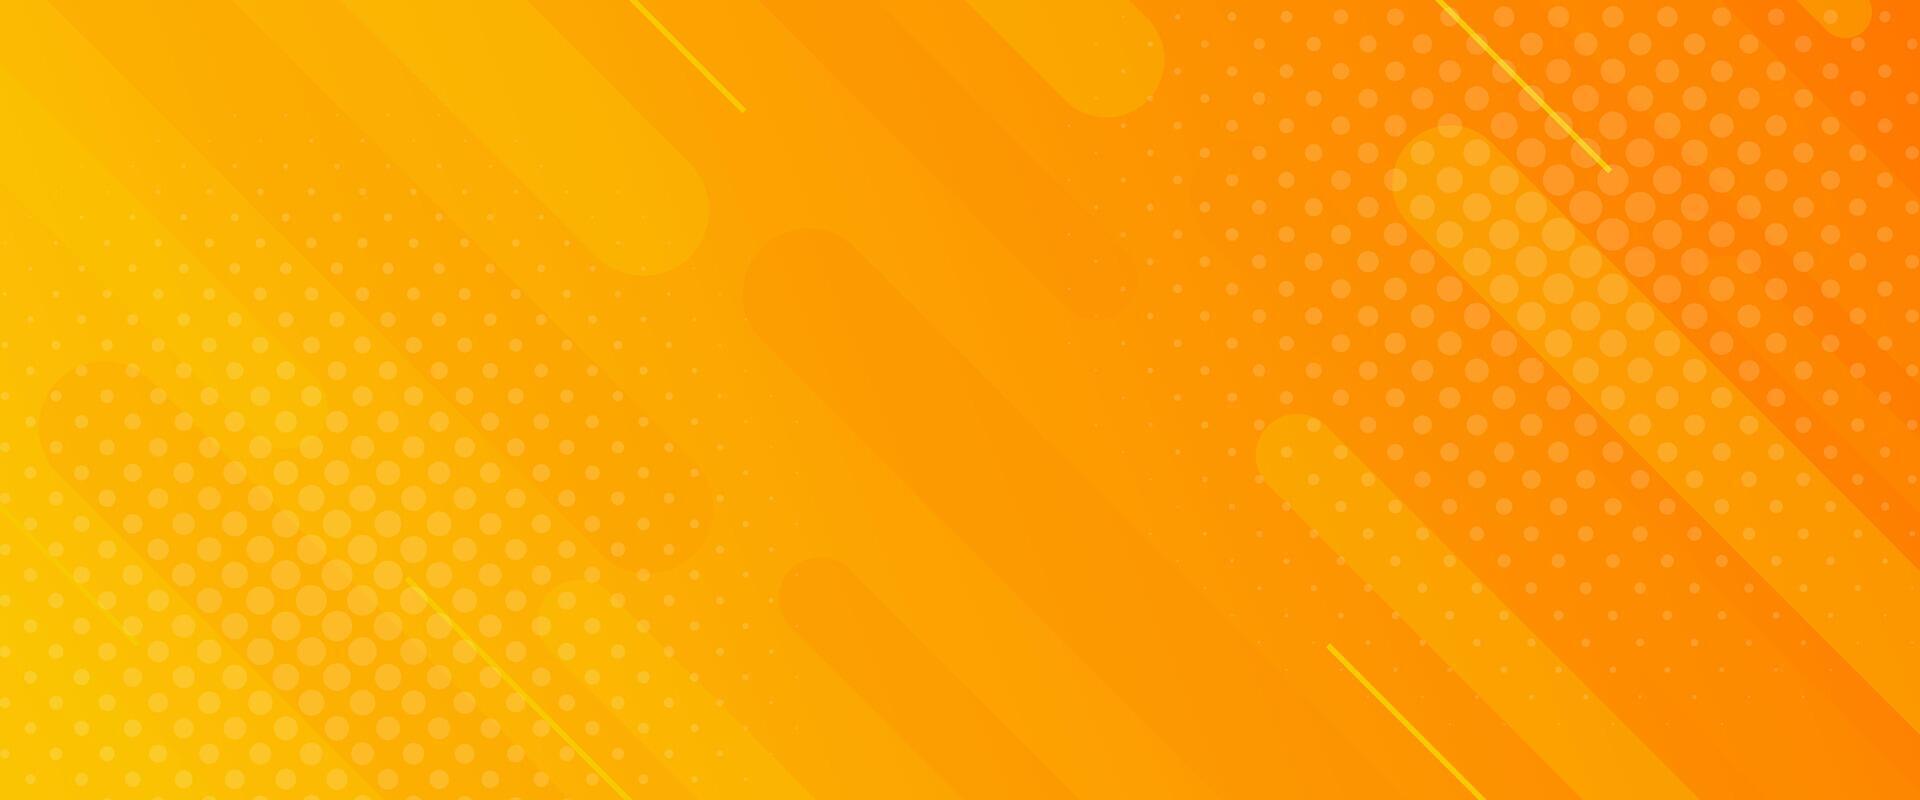 Bright orange abstract gradient banner background with halftone effect. Modern wallpapers. Suitable for templates, sale banners, events, ads, web and pages vector